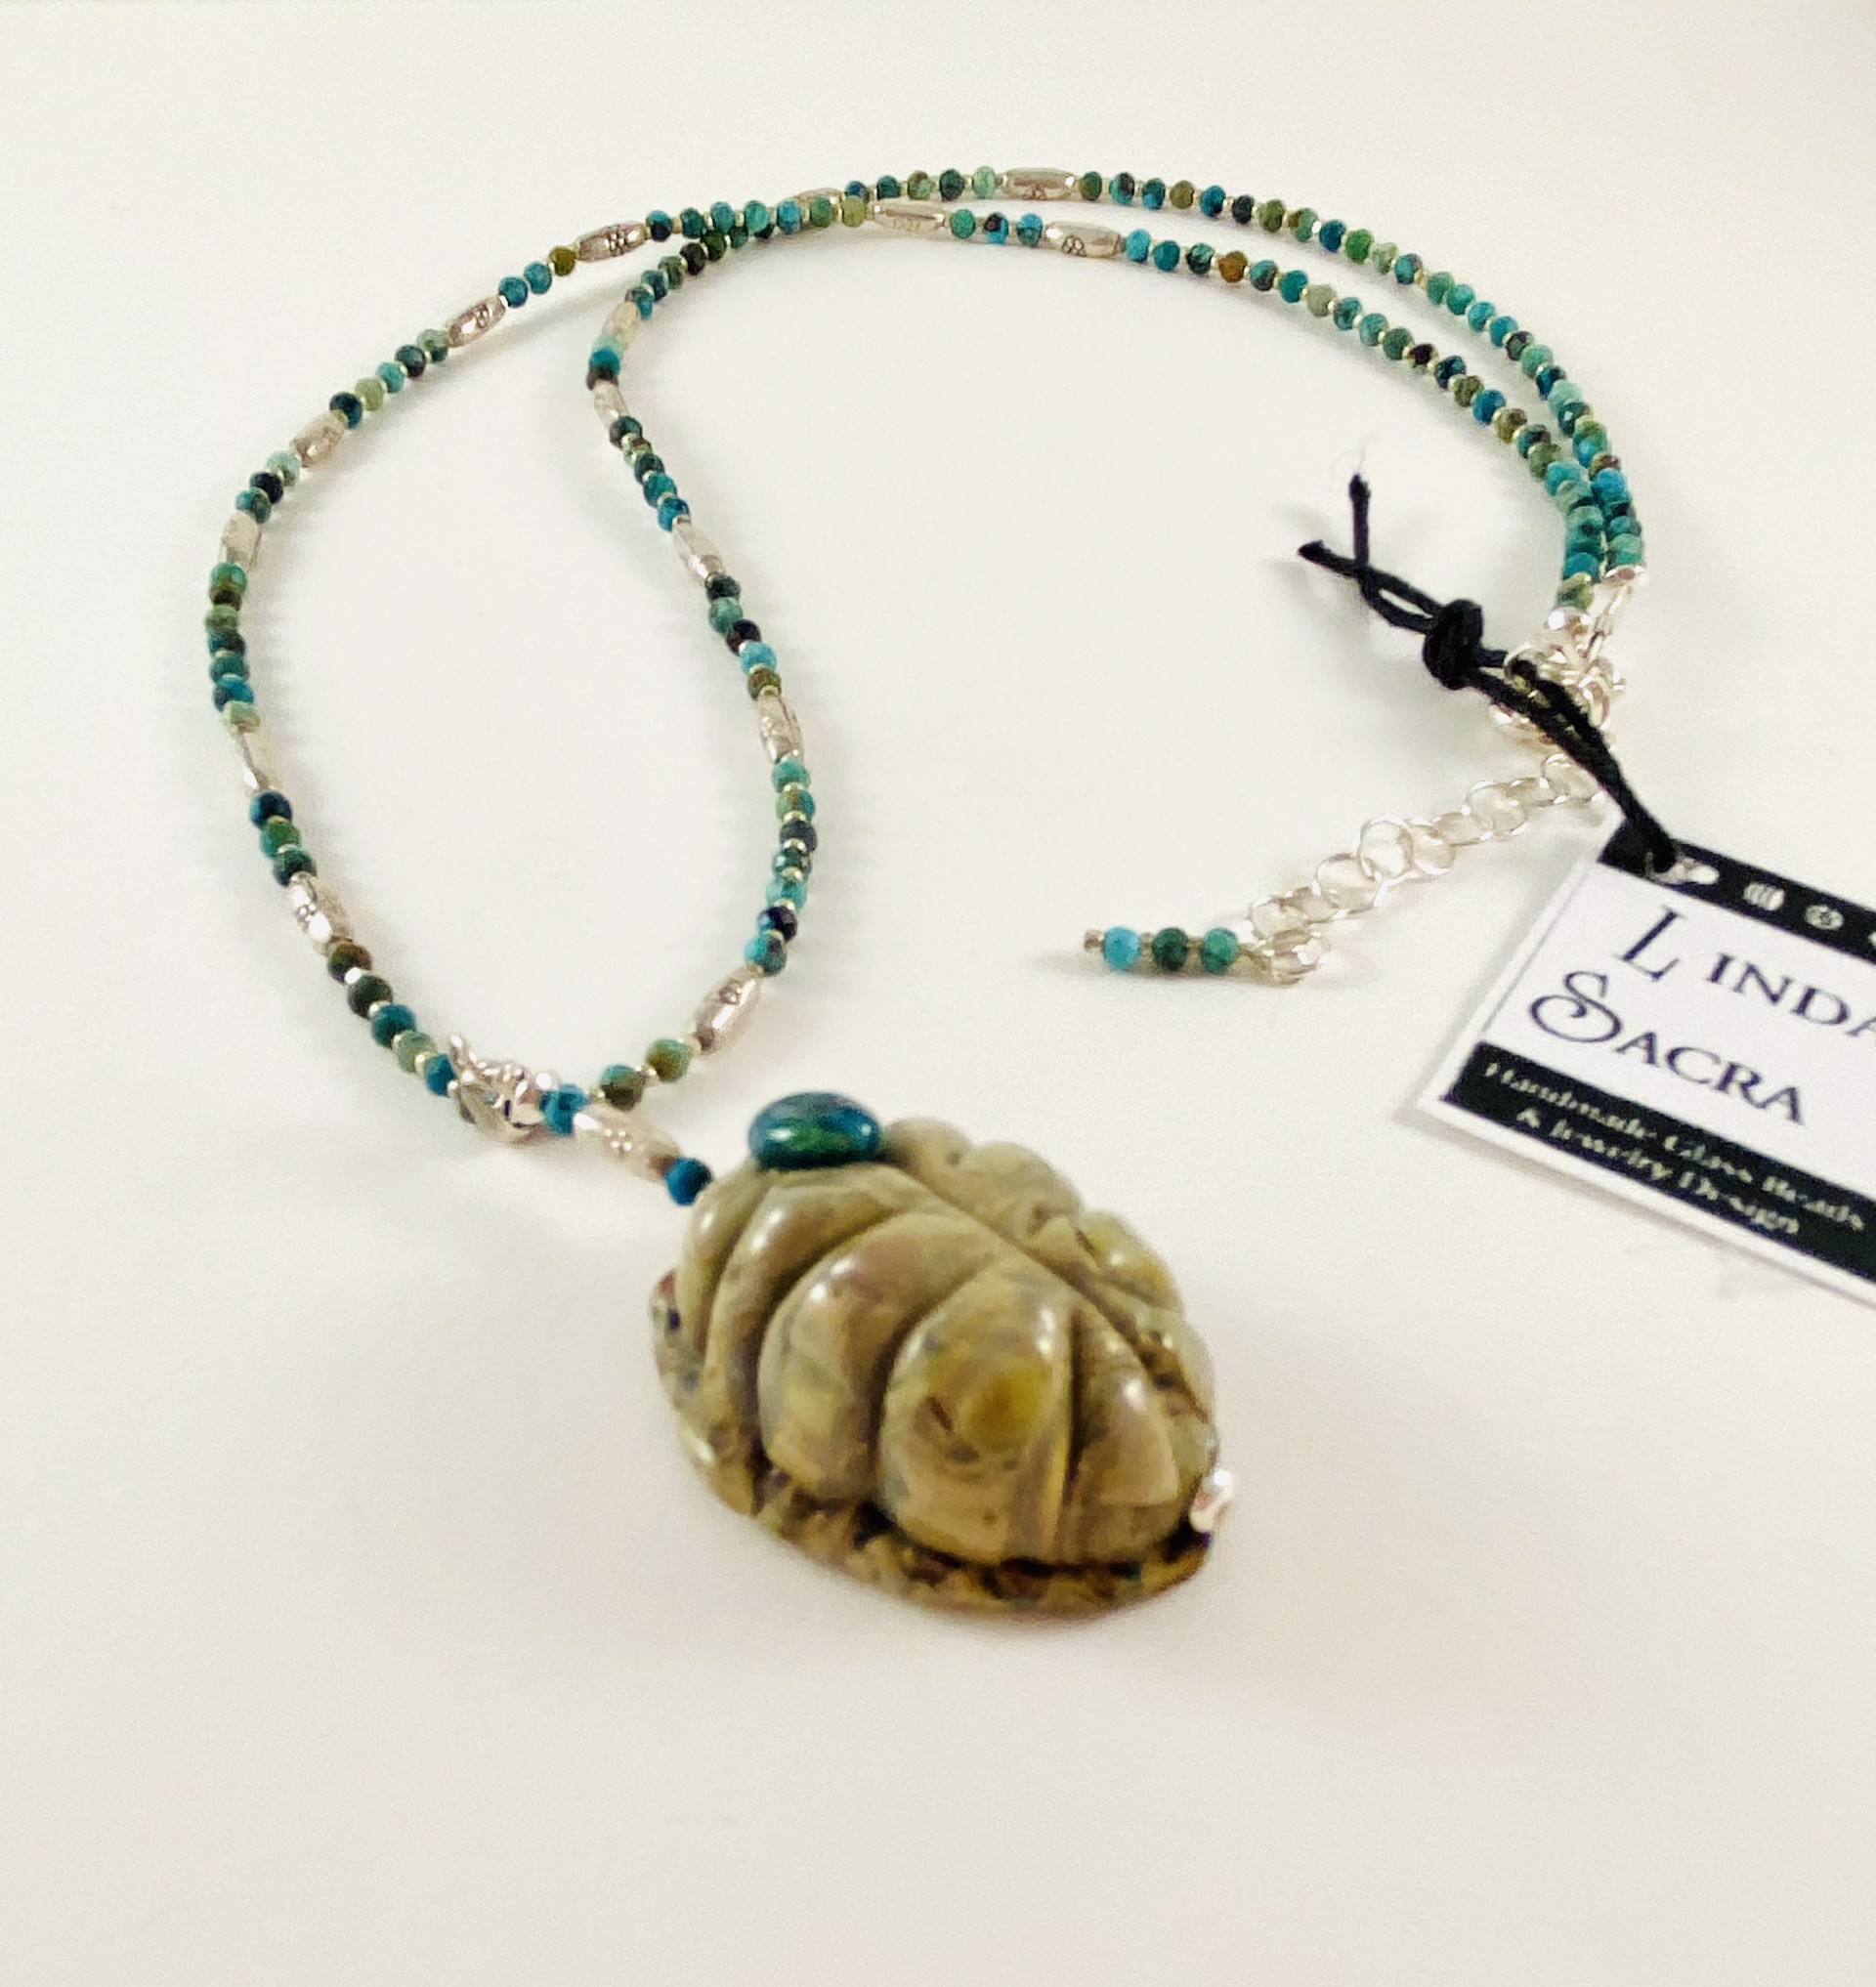 #377 Turtle Shell Pendant, Turquoise and Sterling Necklace by Linda Sacra